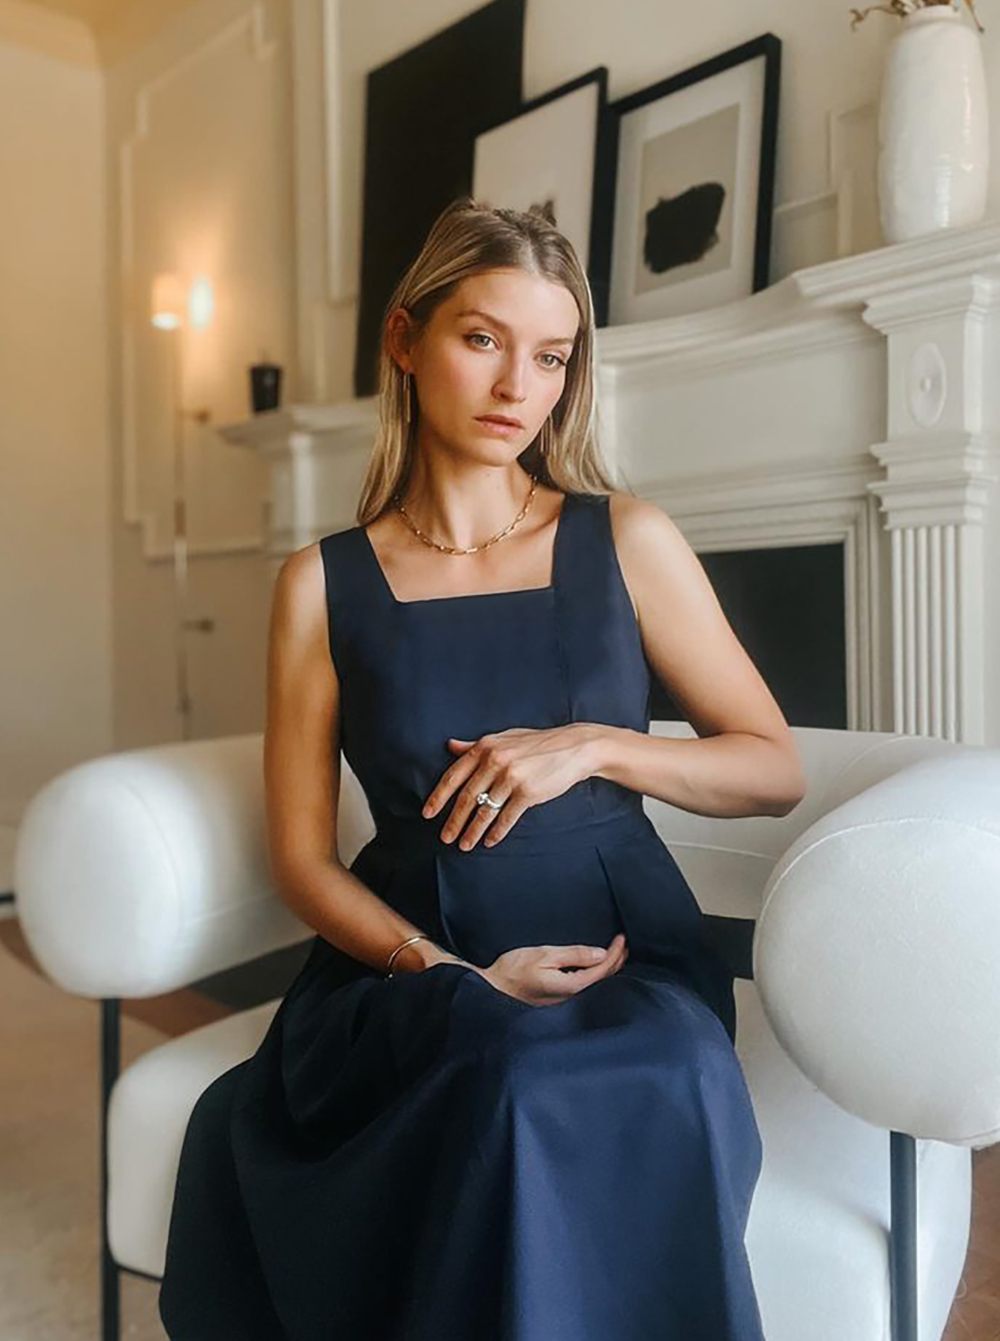 Luxury blue maternity dress, from MARION's collection of luxe maternity and nursing dresses. Sustainable, available in standard and petite maternity sizes. Features designer breastfeeding access. Perfect maternity wedding guest dress, baby shower dress, or maternity tea party dress.